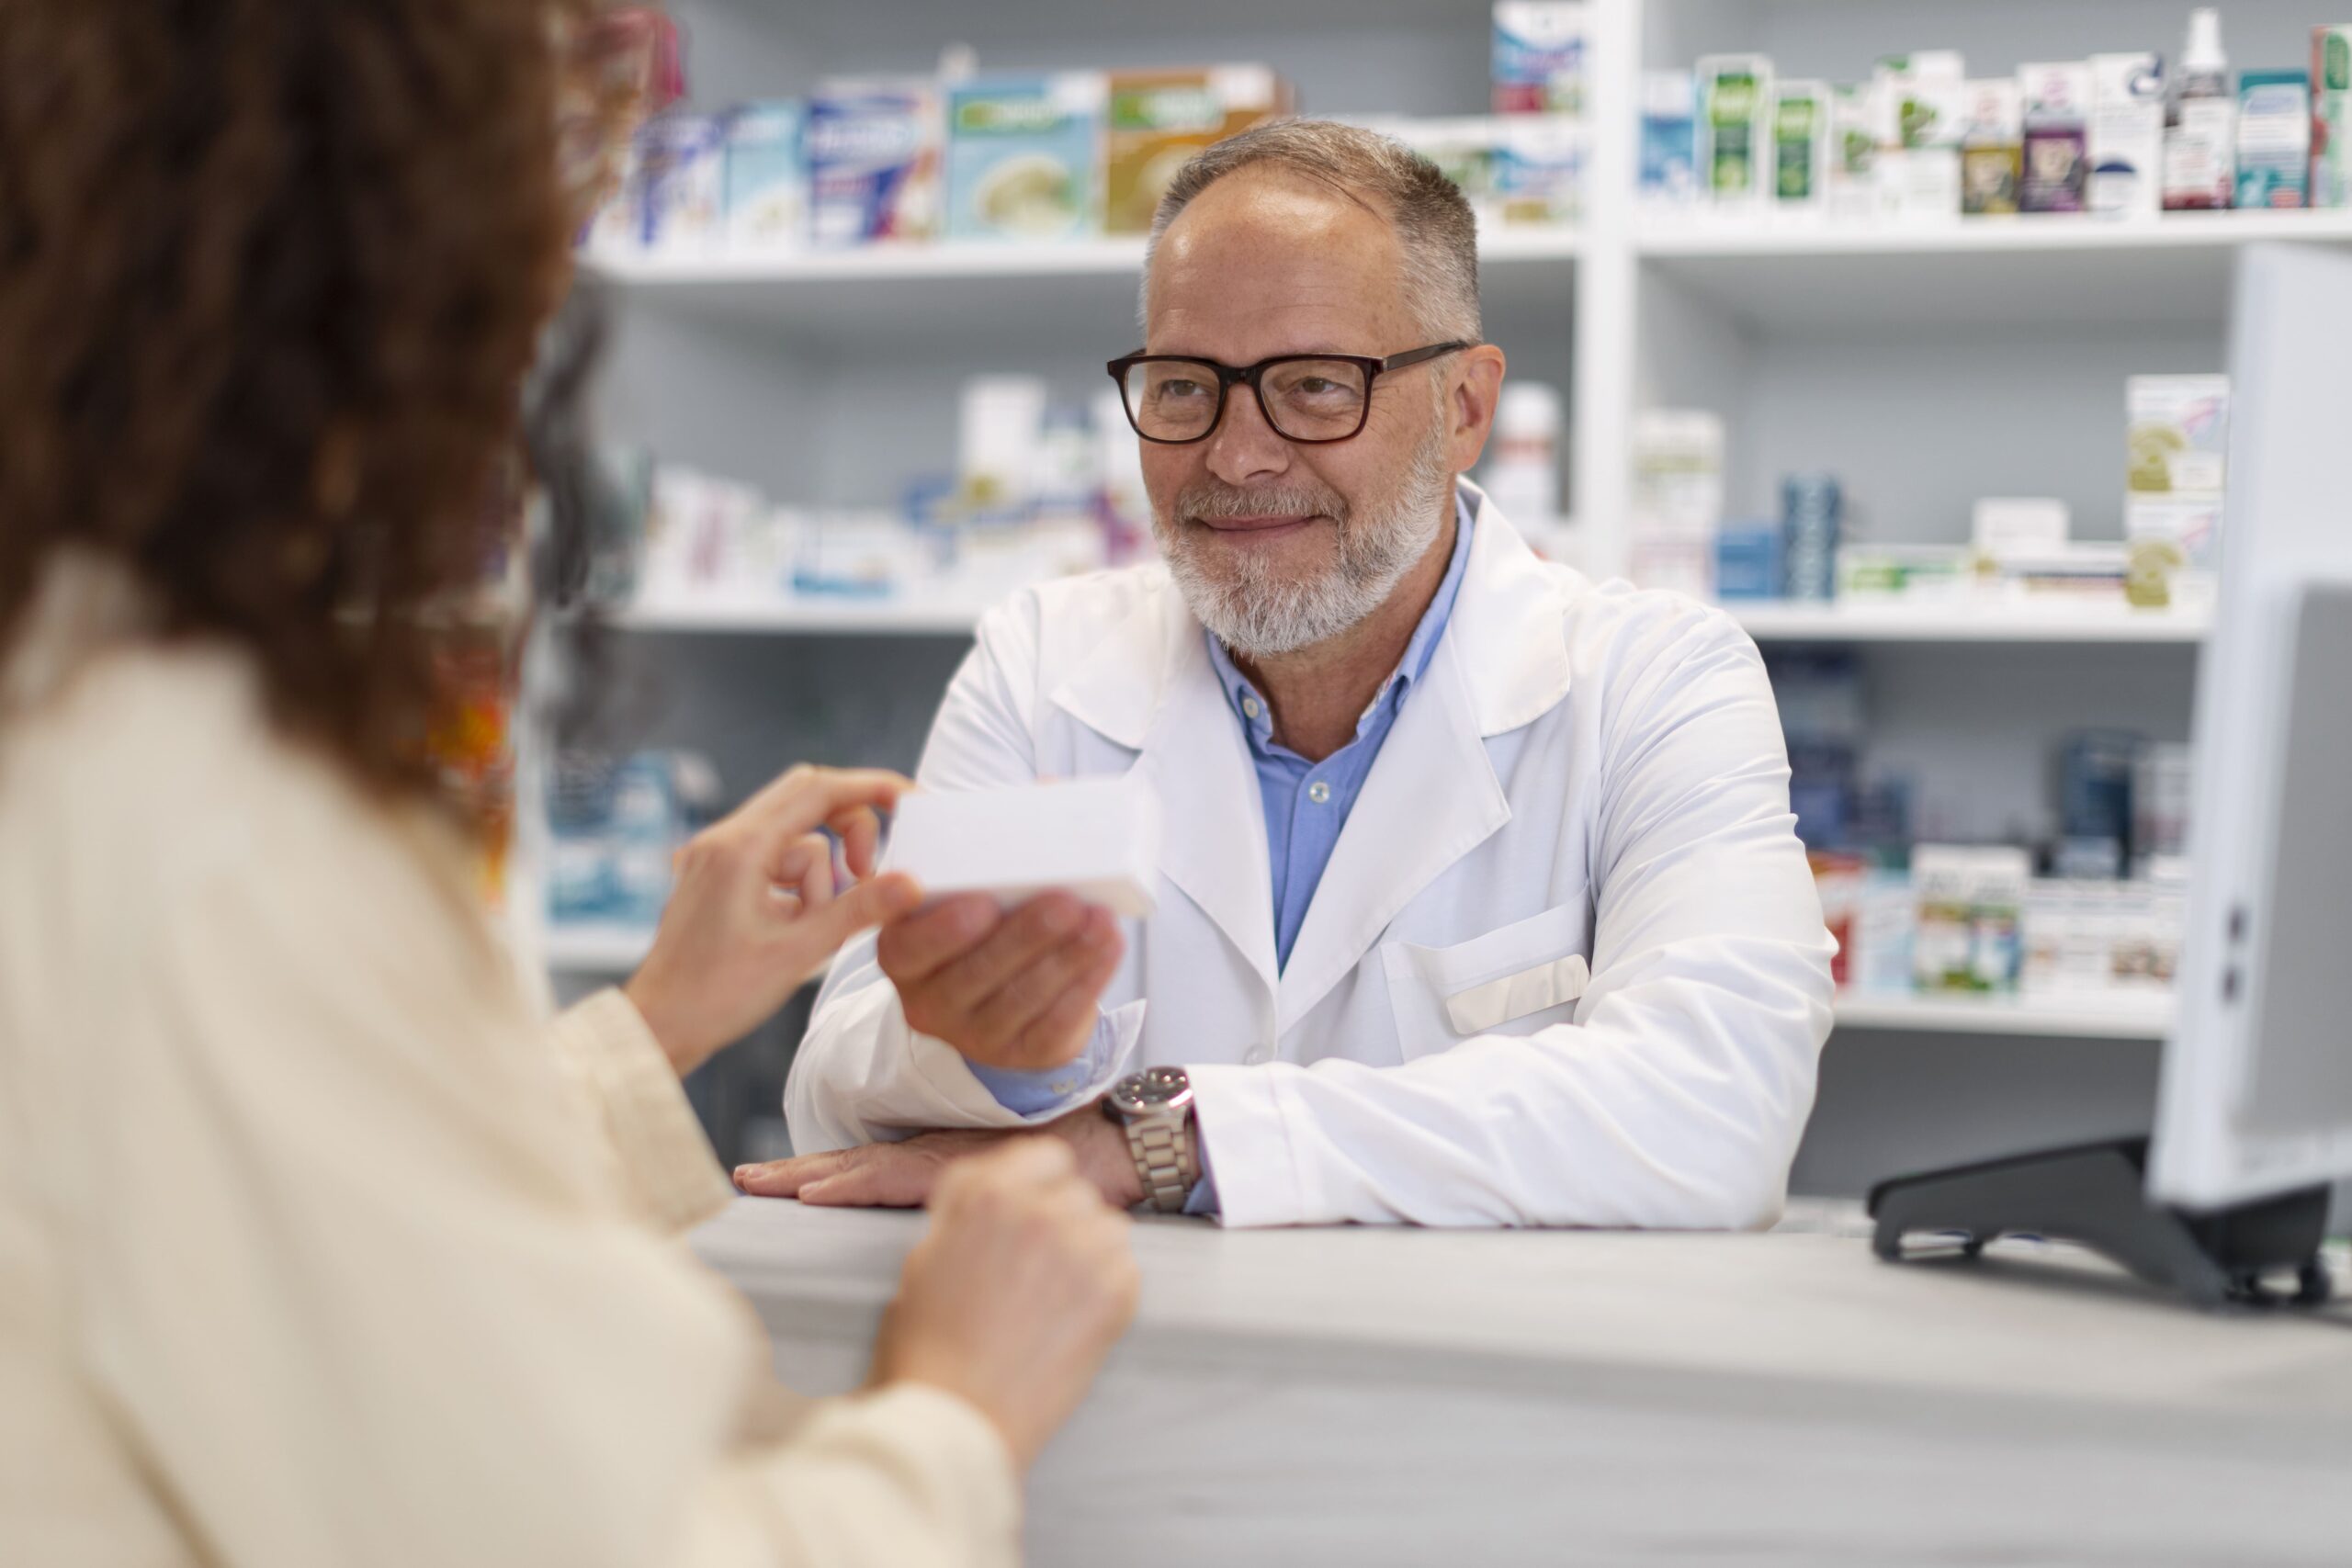 Do You Have To Pay for Prescriptions? How Prescriptions Work?